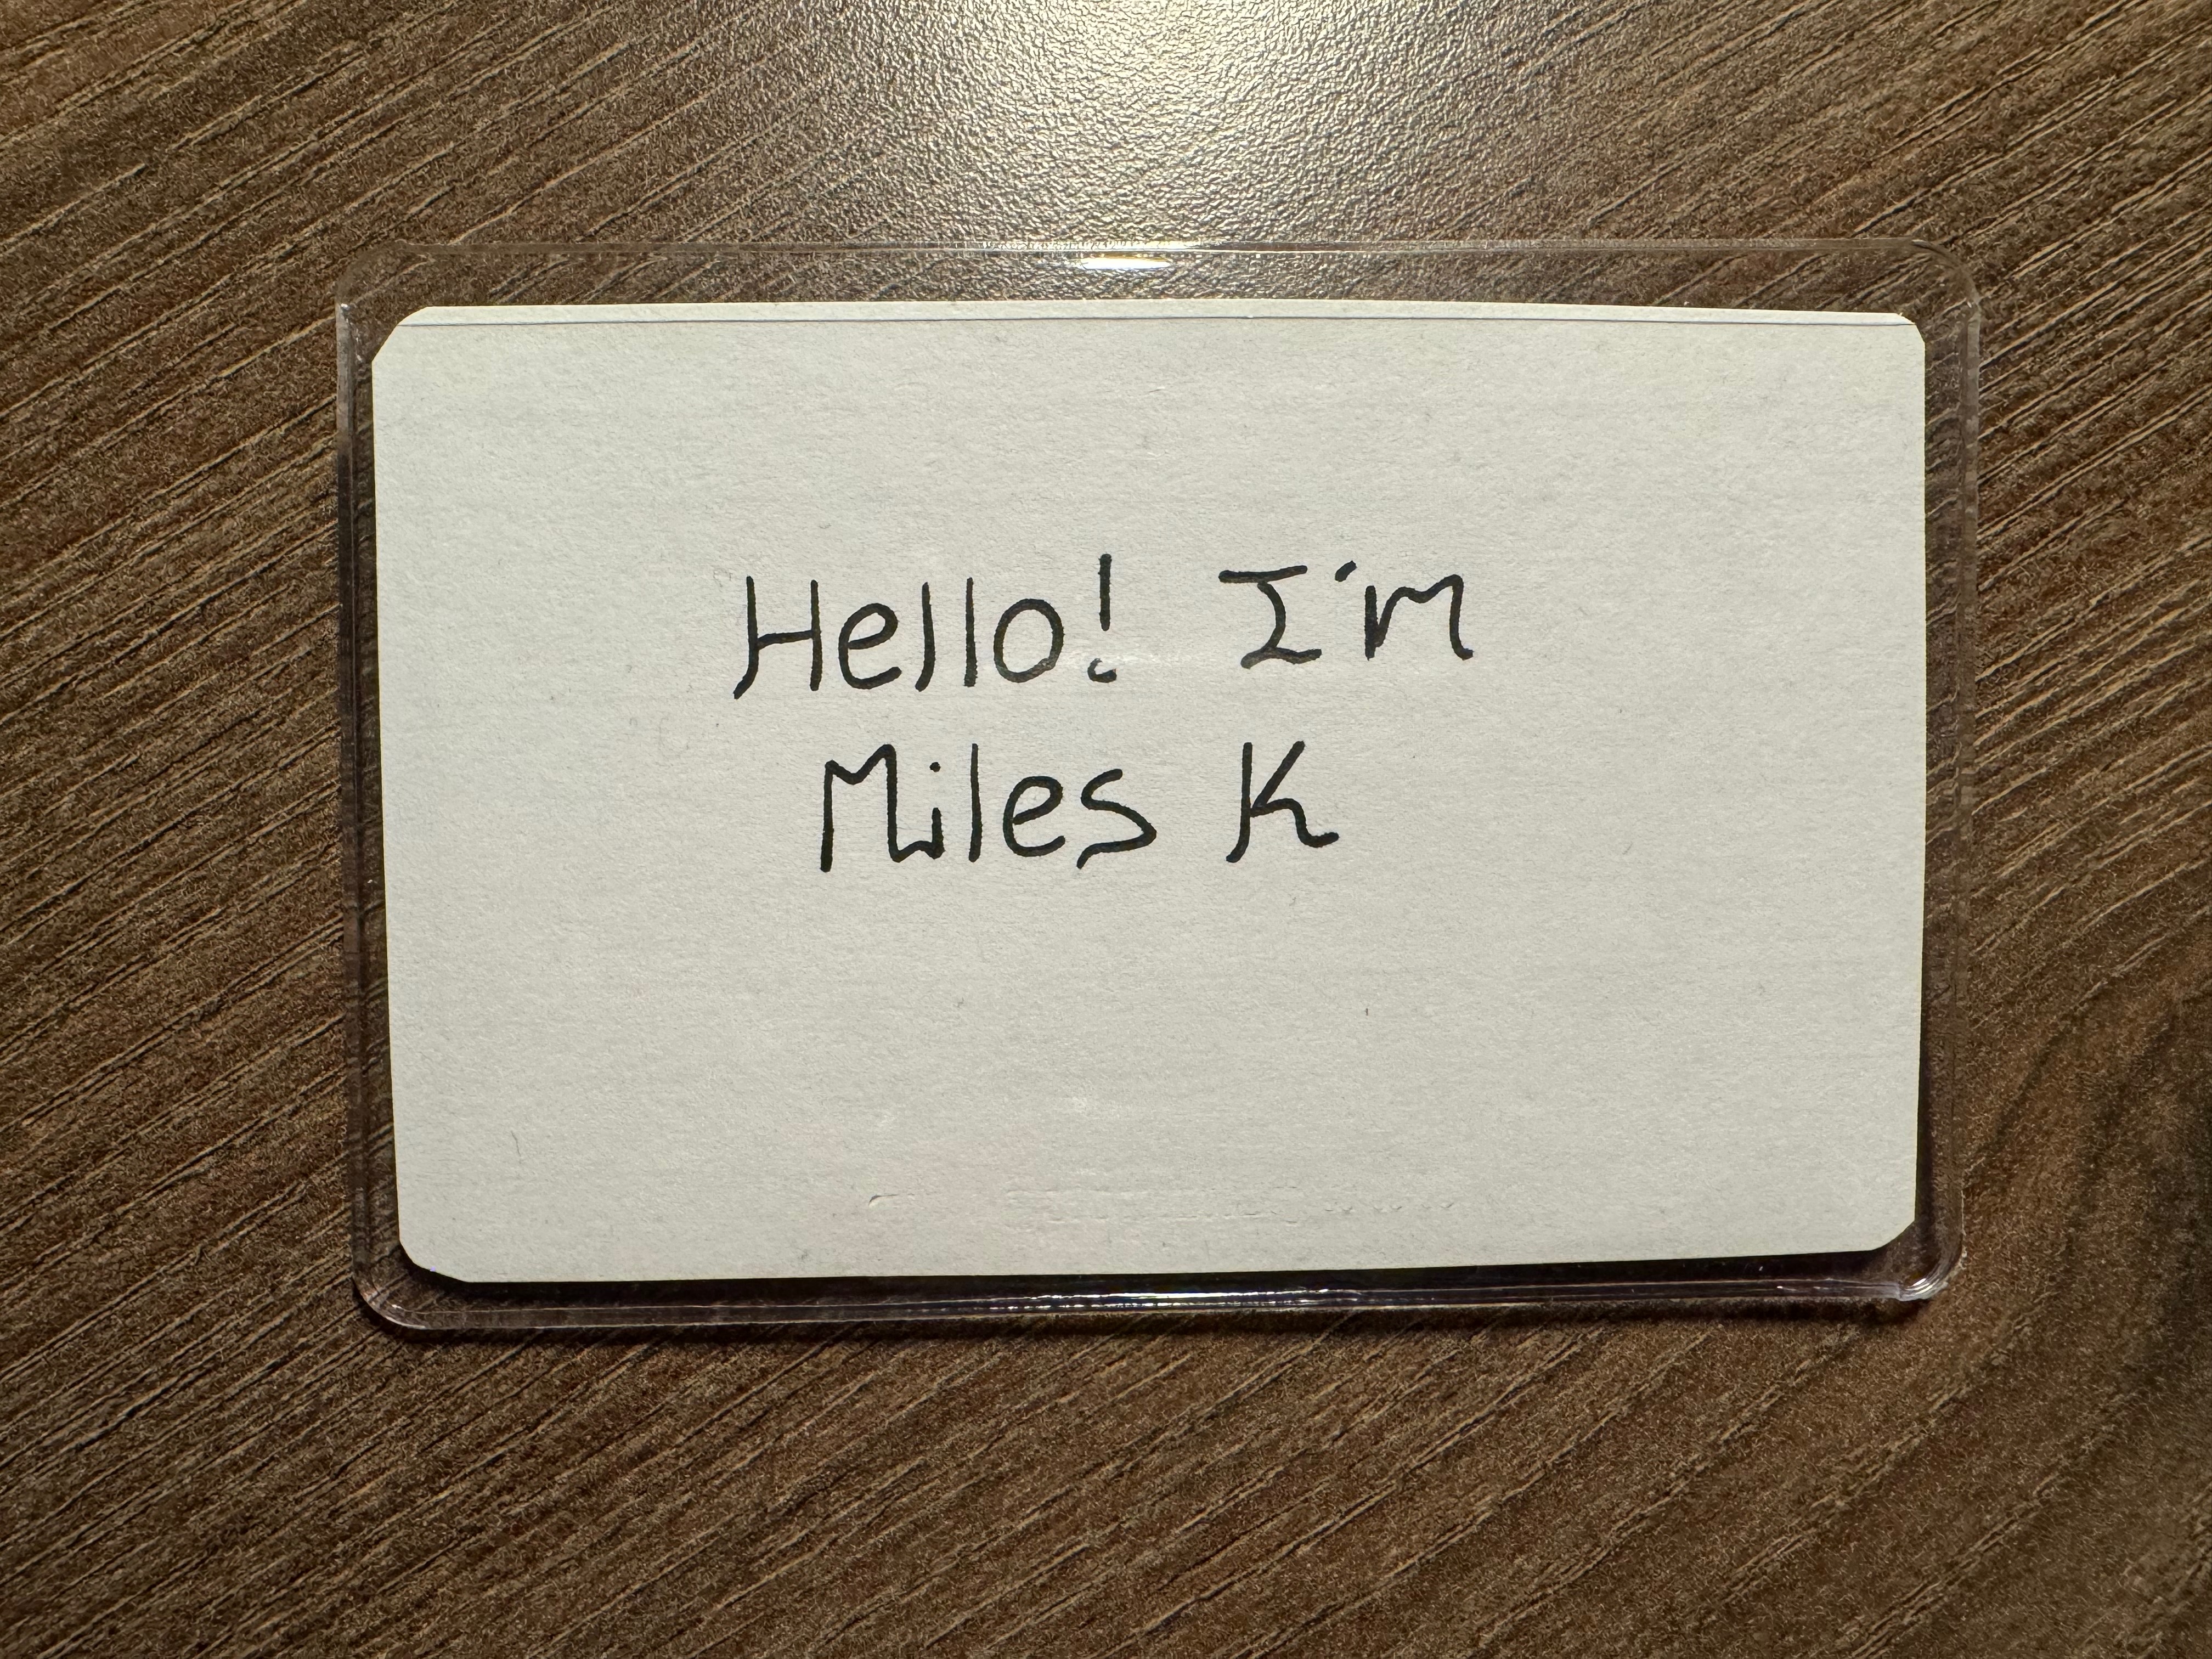 A photo of my nametag